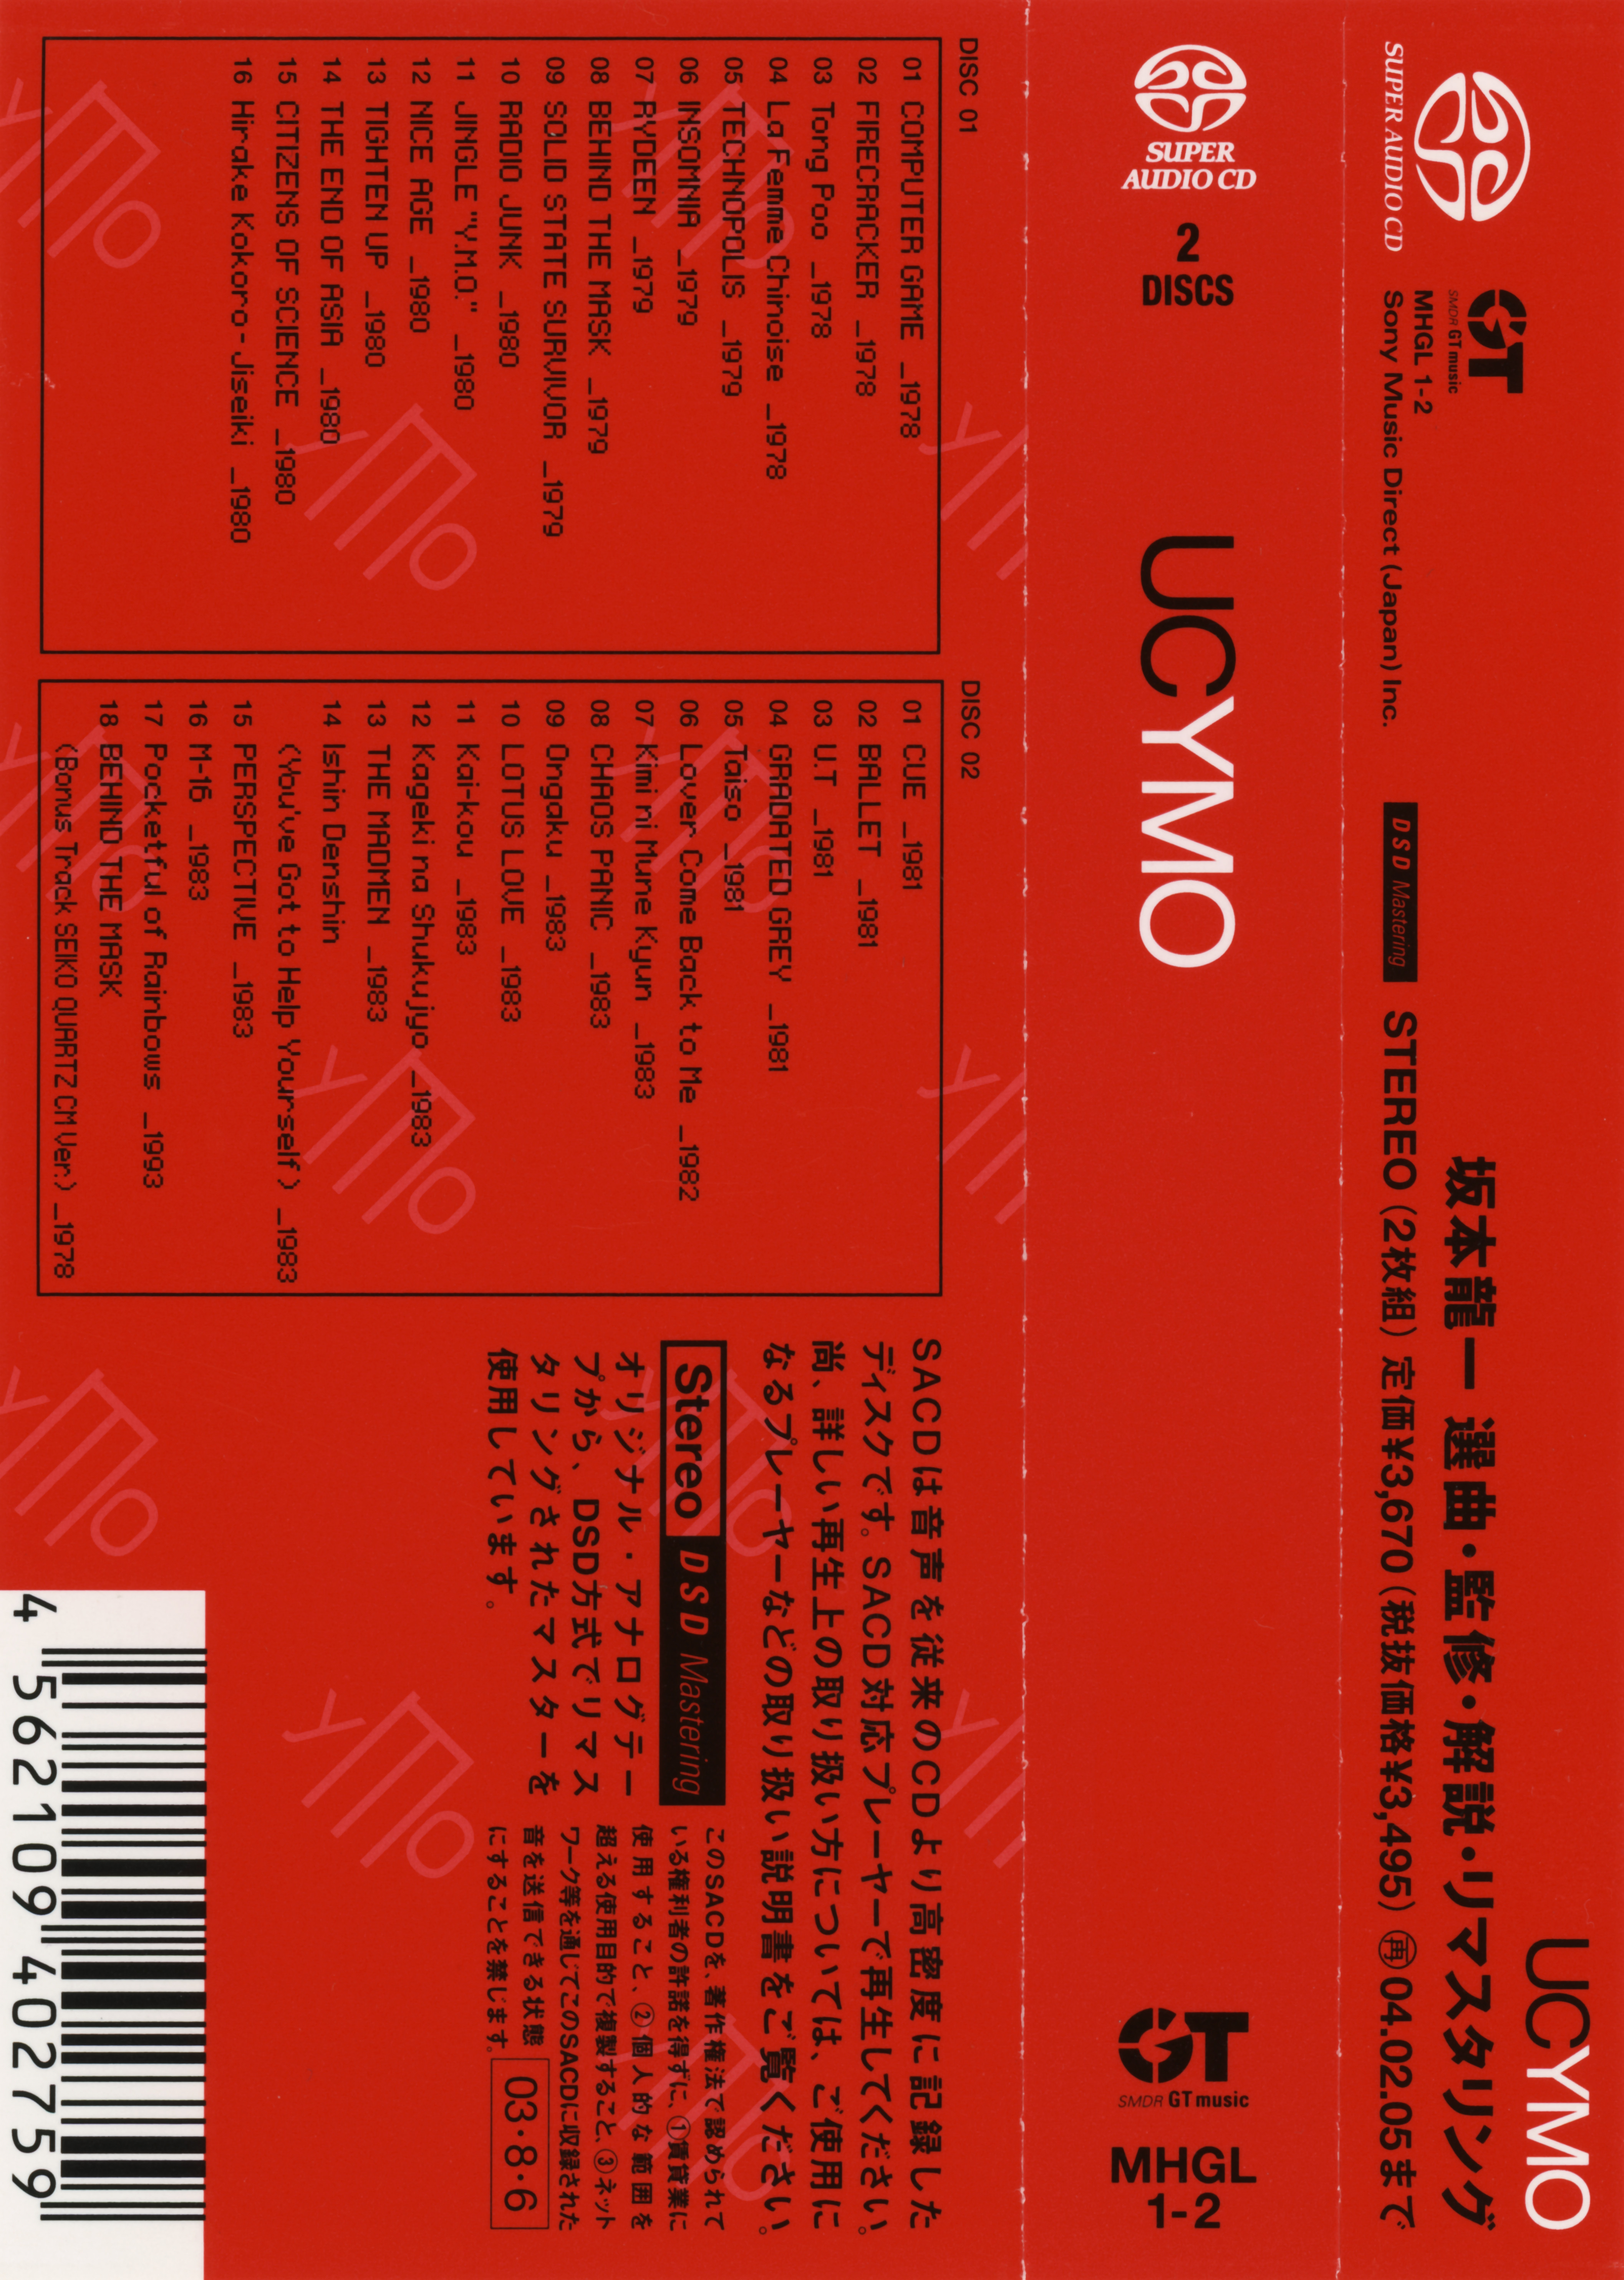 Release “UC YMO: Ultimate Collection of Yellow Magic Orchestra” by